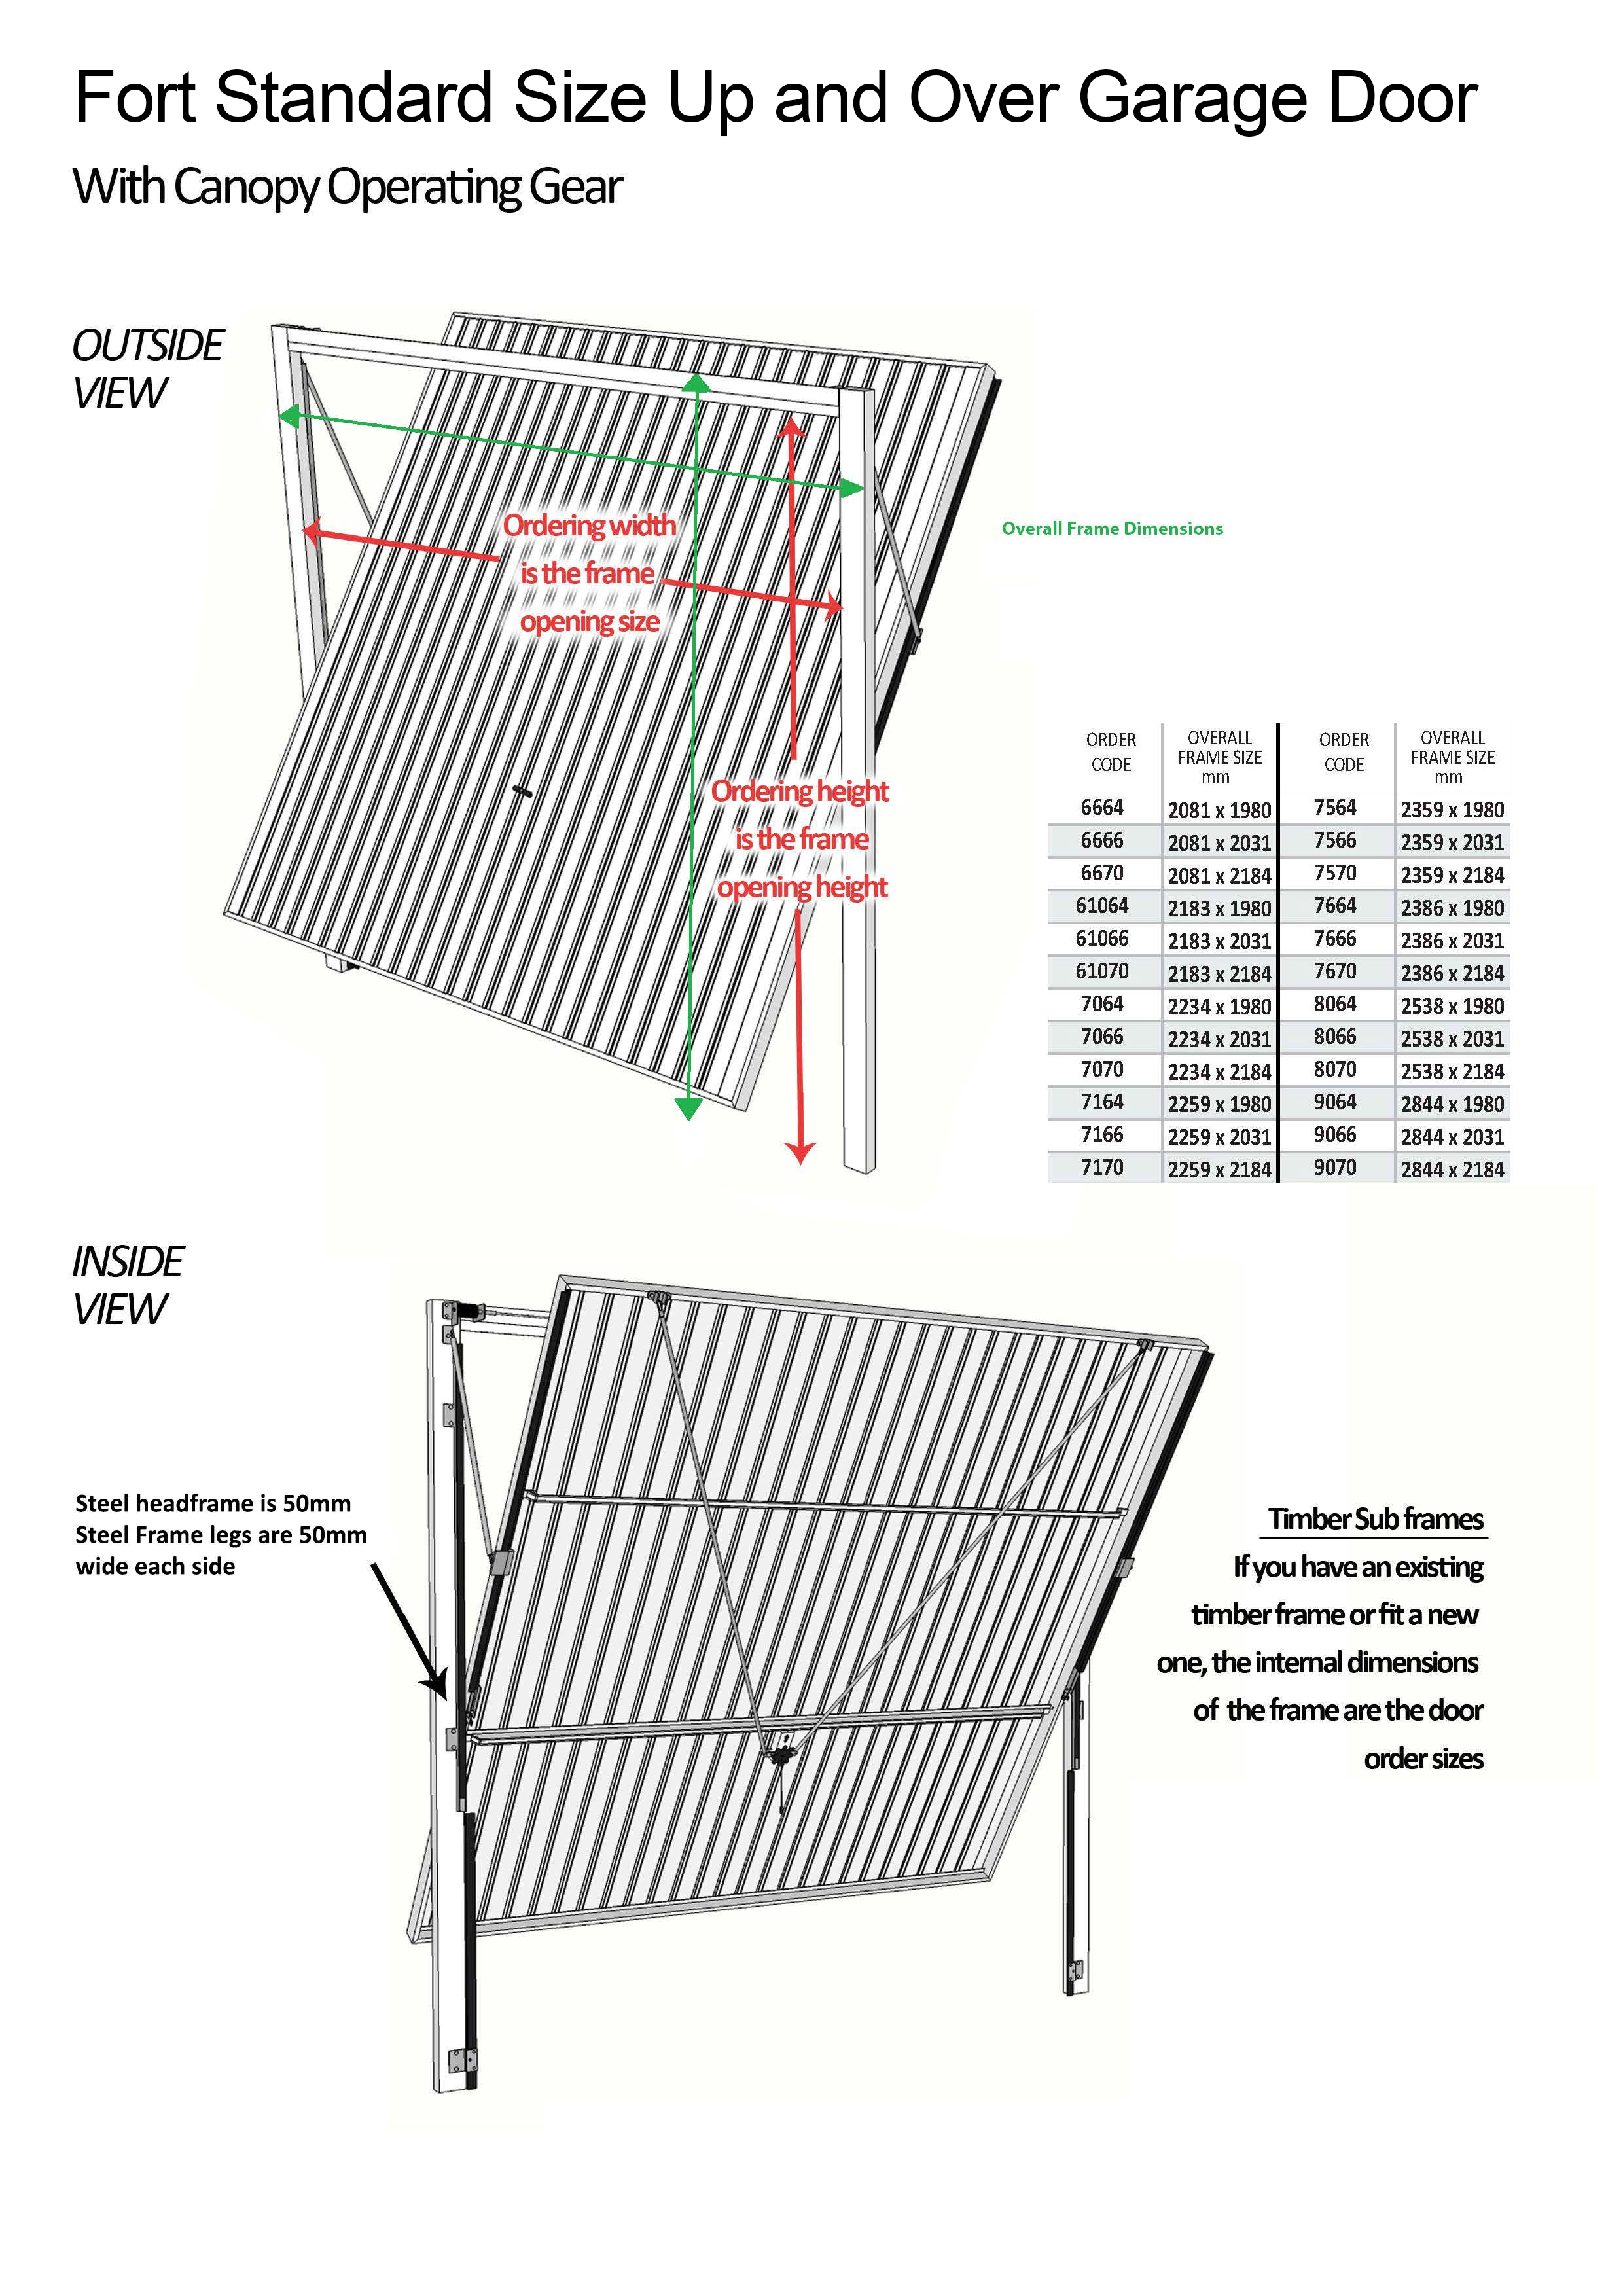 Measuring guide for Fort Canopy Up and Over Garage Door